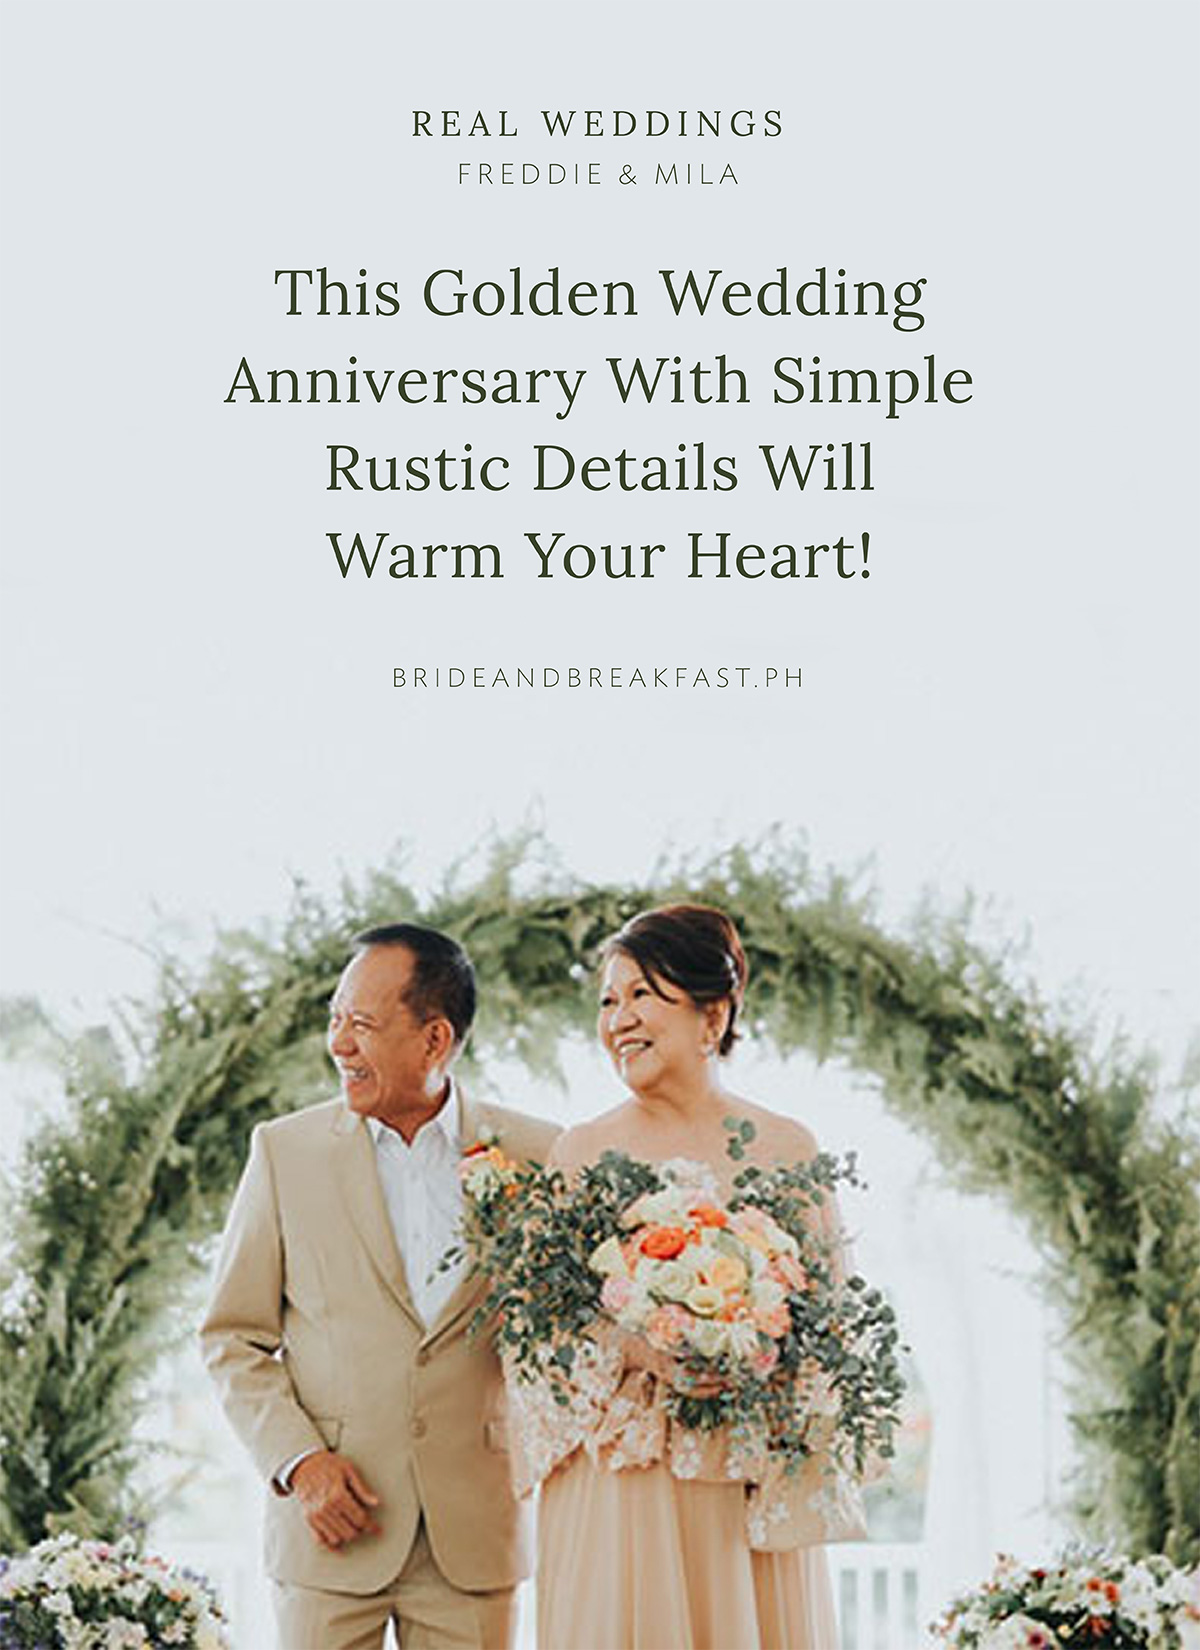 This Golden Wedding Anniversary with Simple Rustic Details will Warm Your Heart!